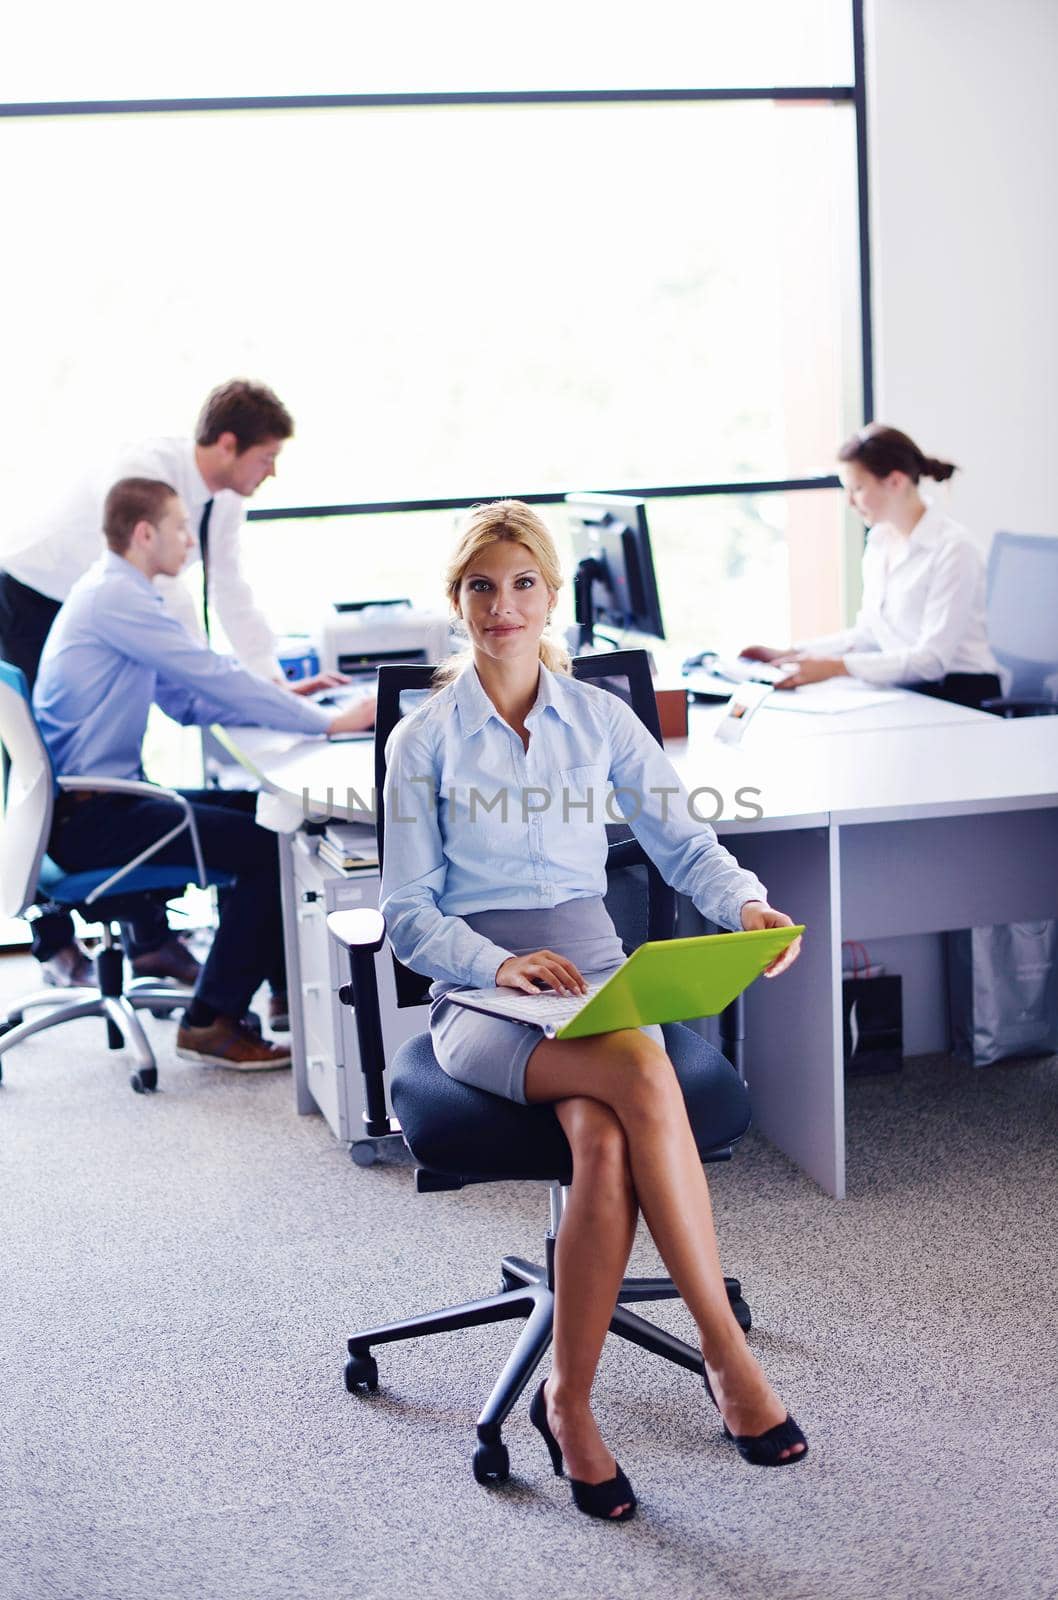 business woman  with her staff,  people group in background at modern bright office indoors